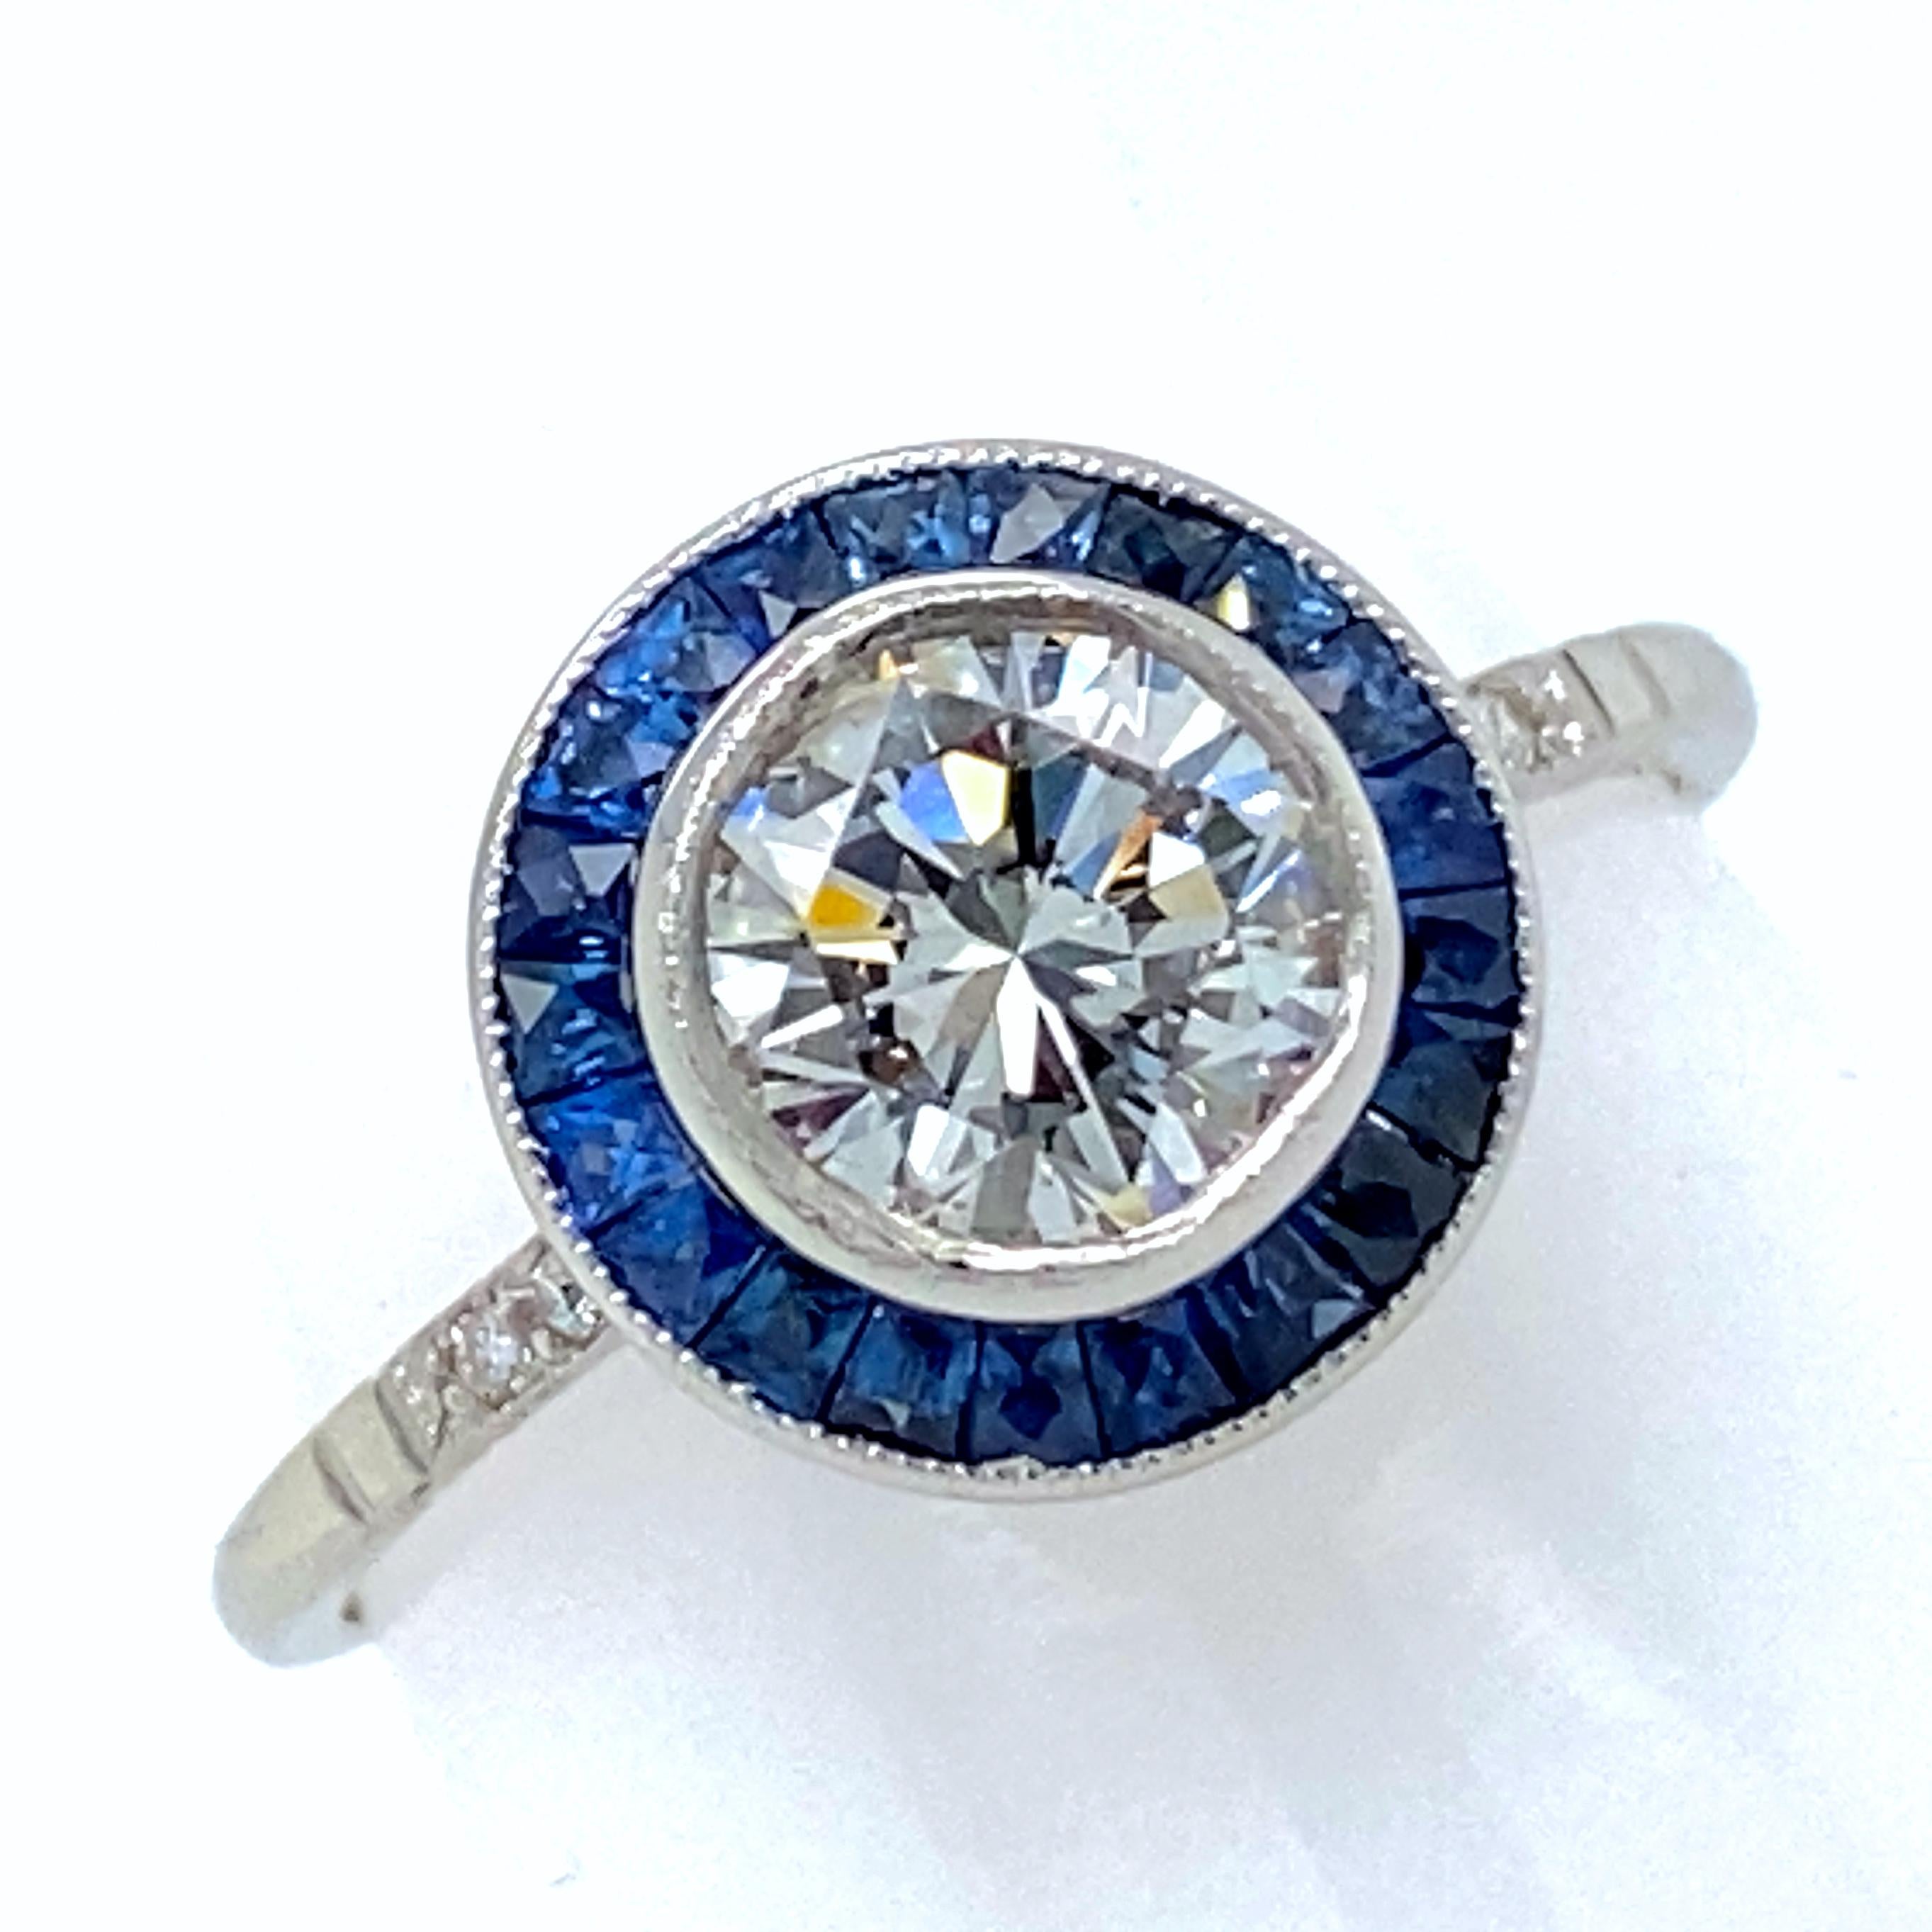 This faithful reproduction of a classic Art Deco design features a channel-set round halo of natural sapphires around a certified diamond plus pavé-set diamond shoulders.  

The center diamond is a 1.19 carat brilliant cut round, and it's an